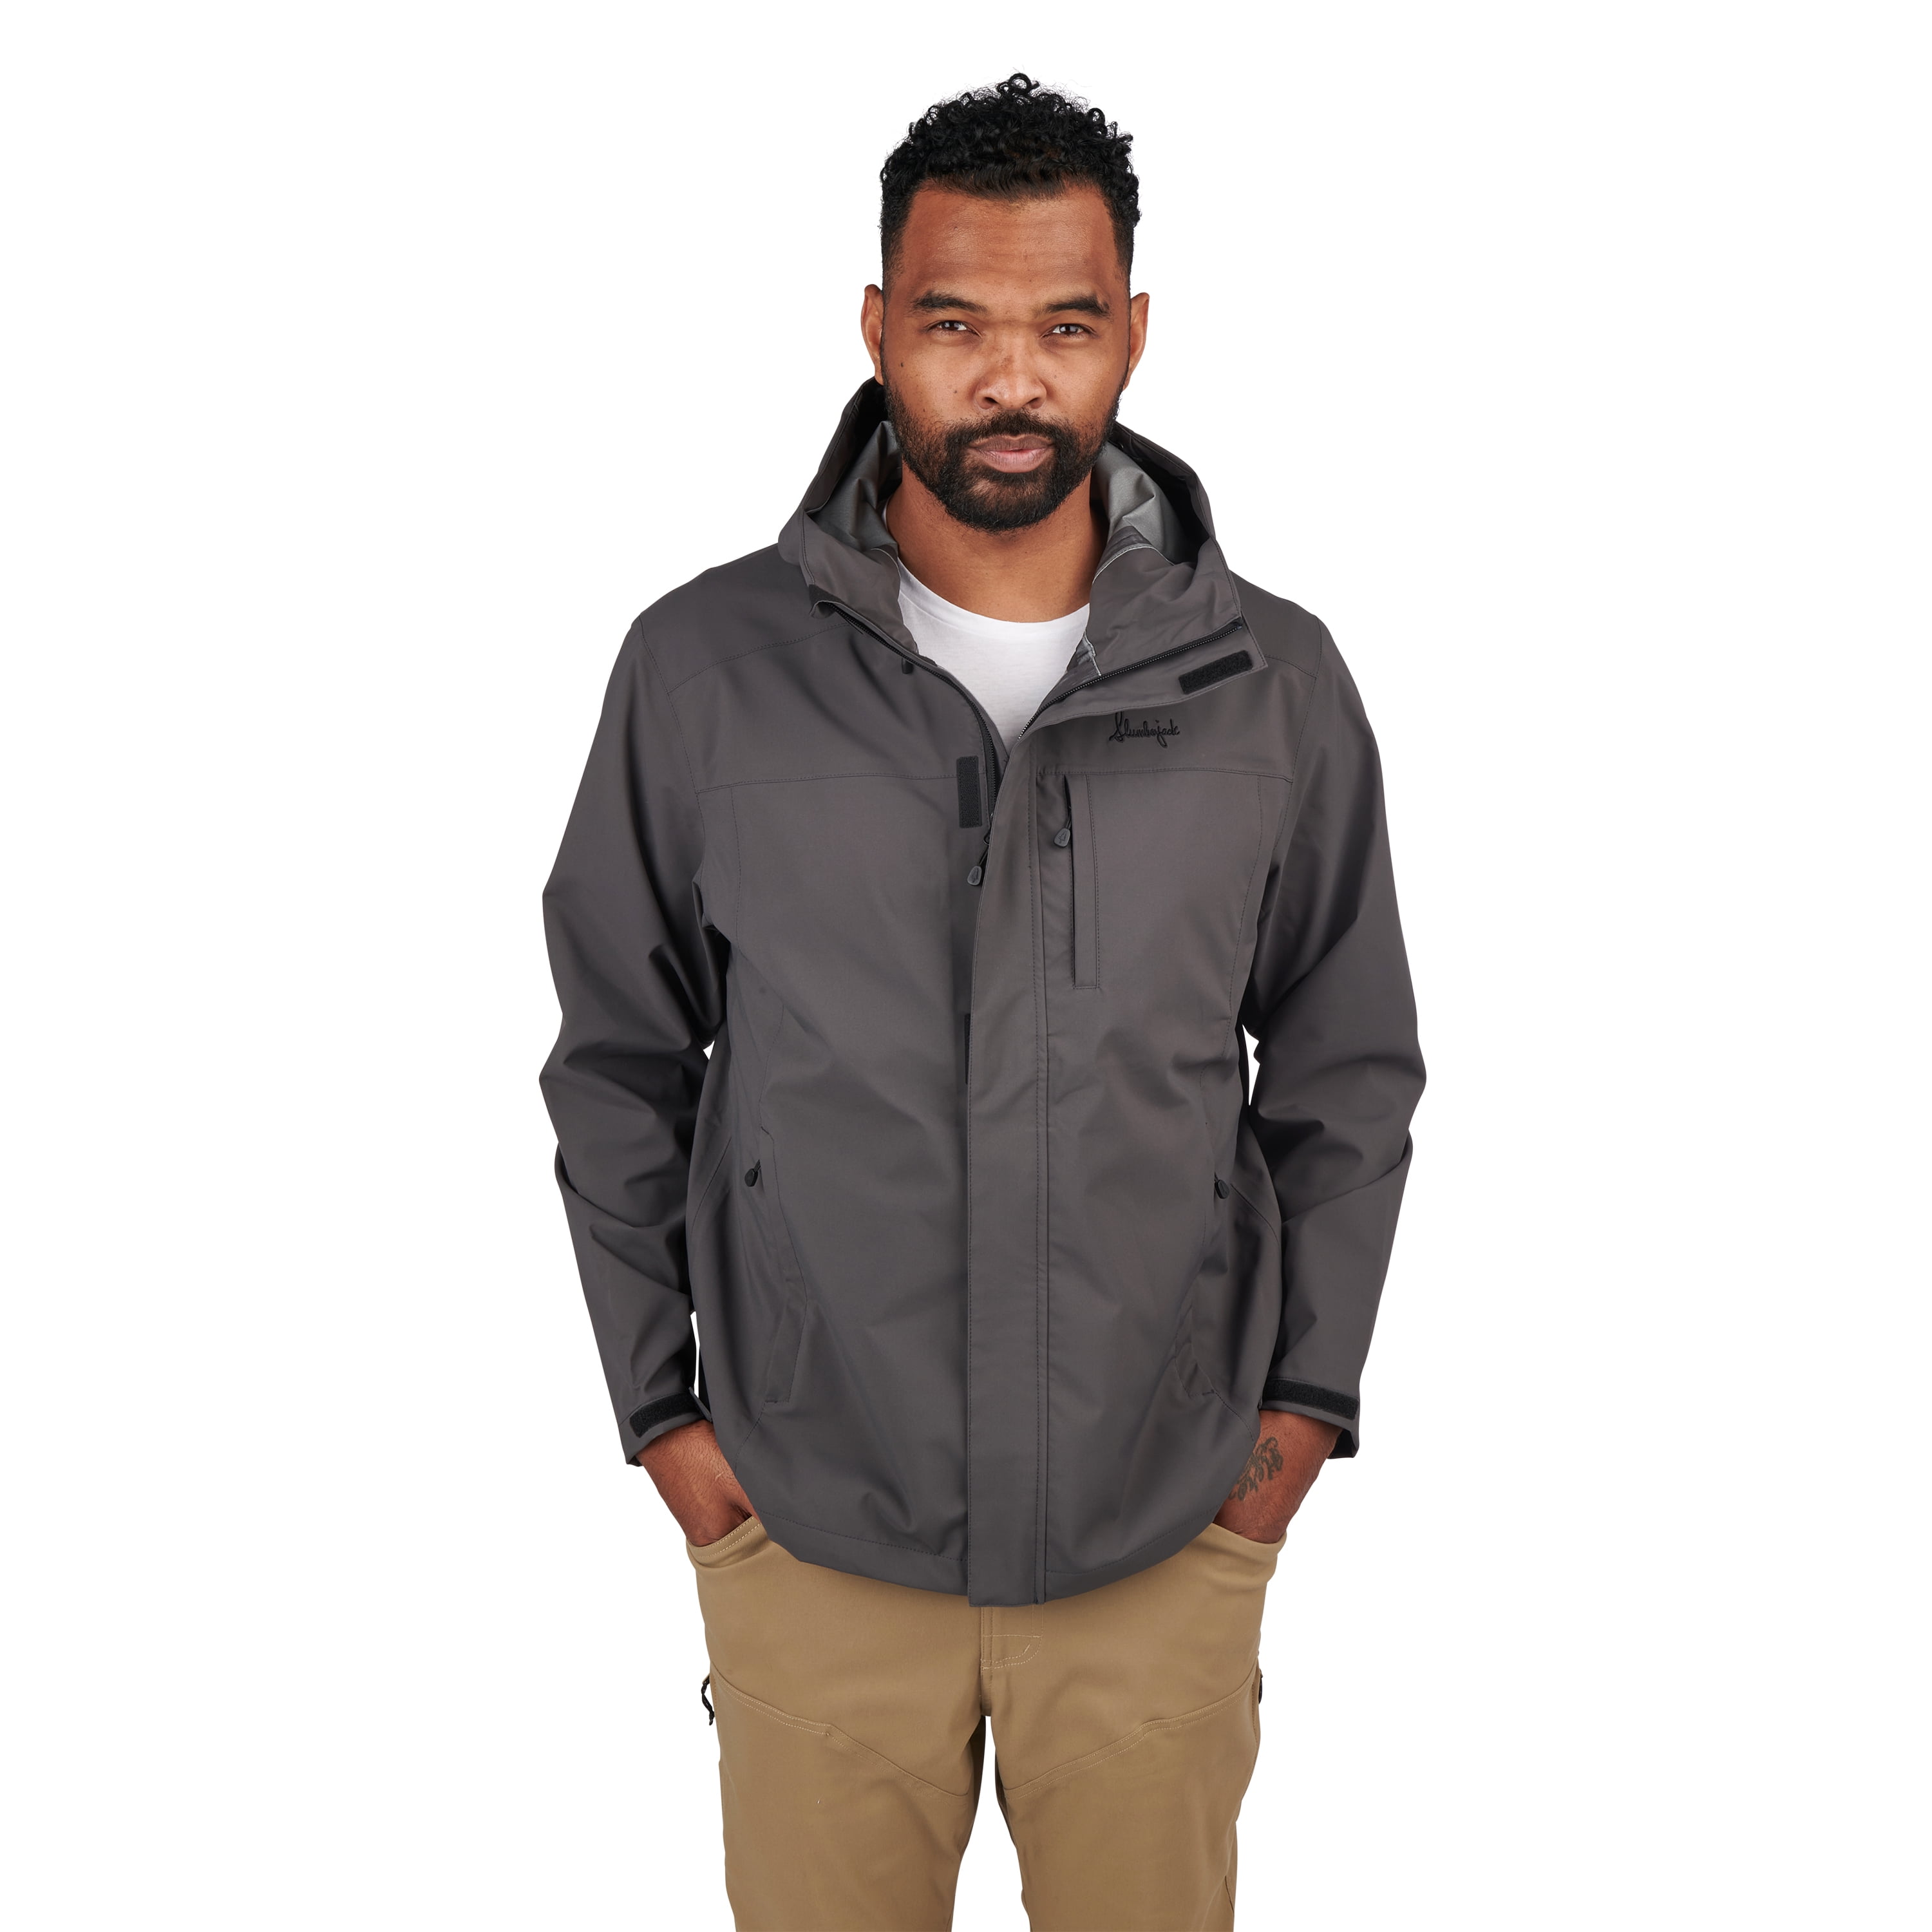 uvex collection 26 men's rain jacket | Protective clothing and workwear